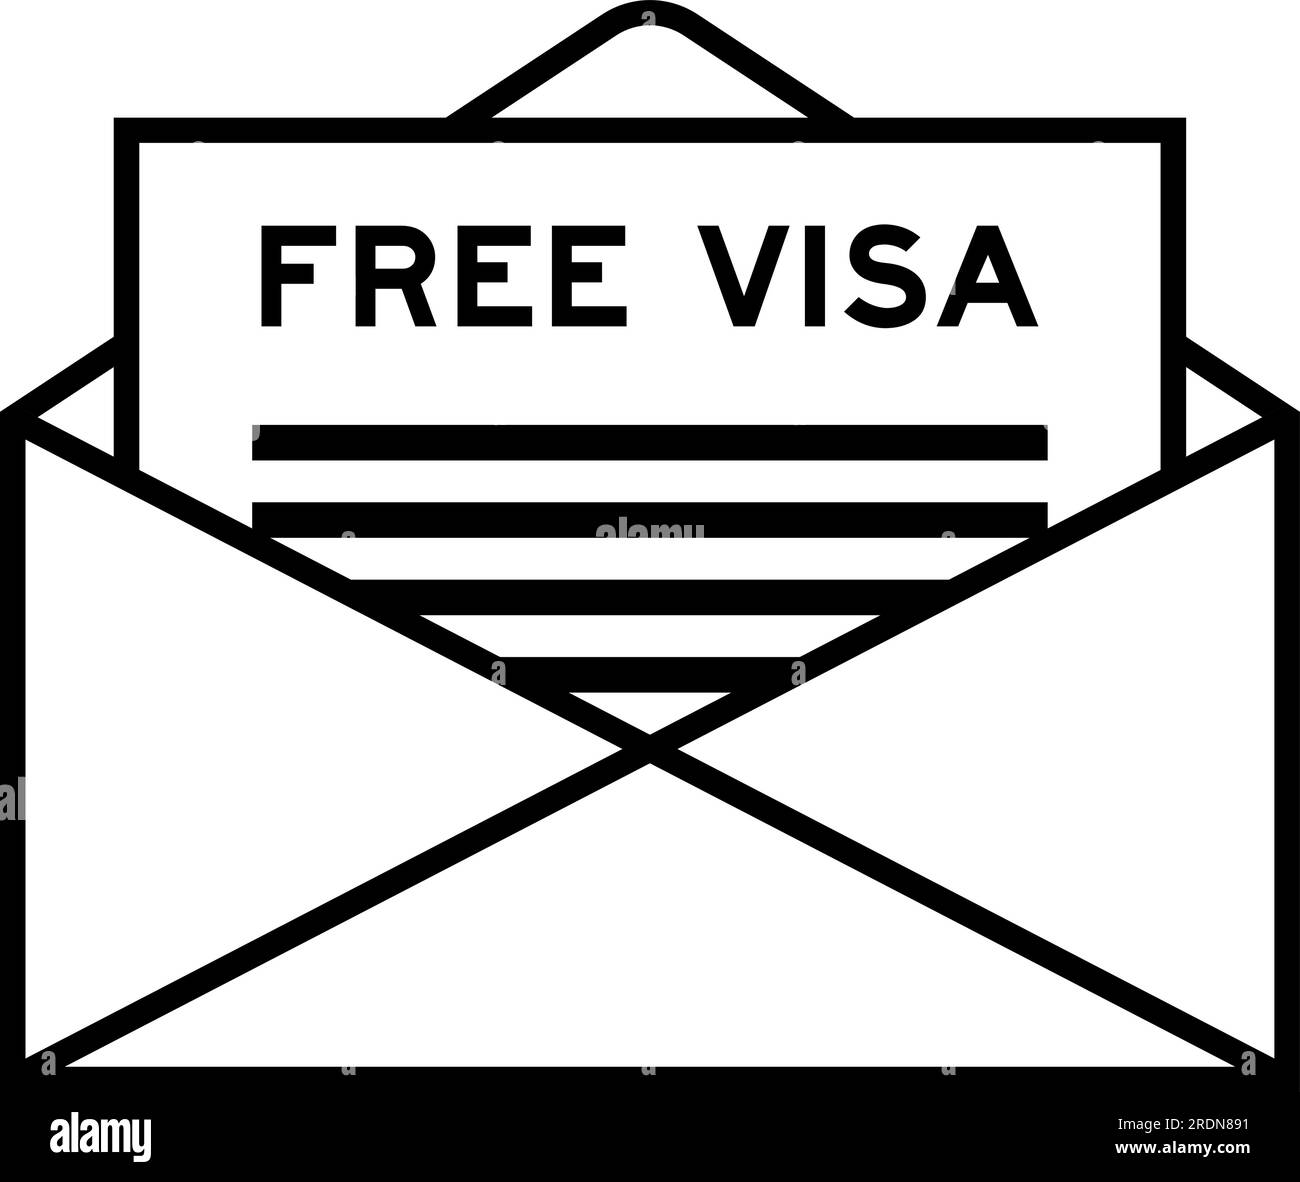 Envelope and letter sign with word free visa as the headline Stock Vector